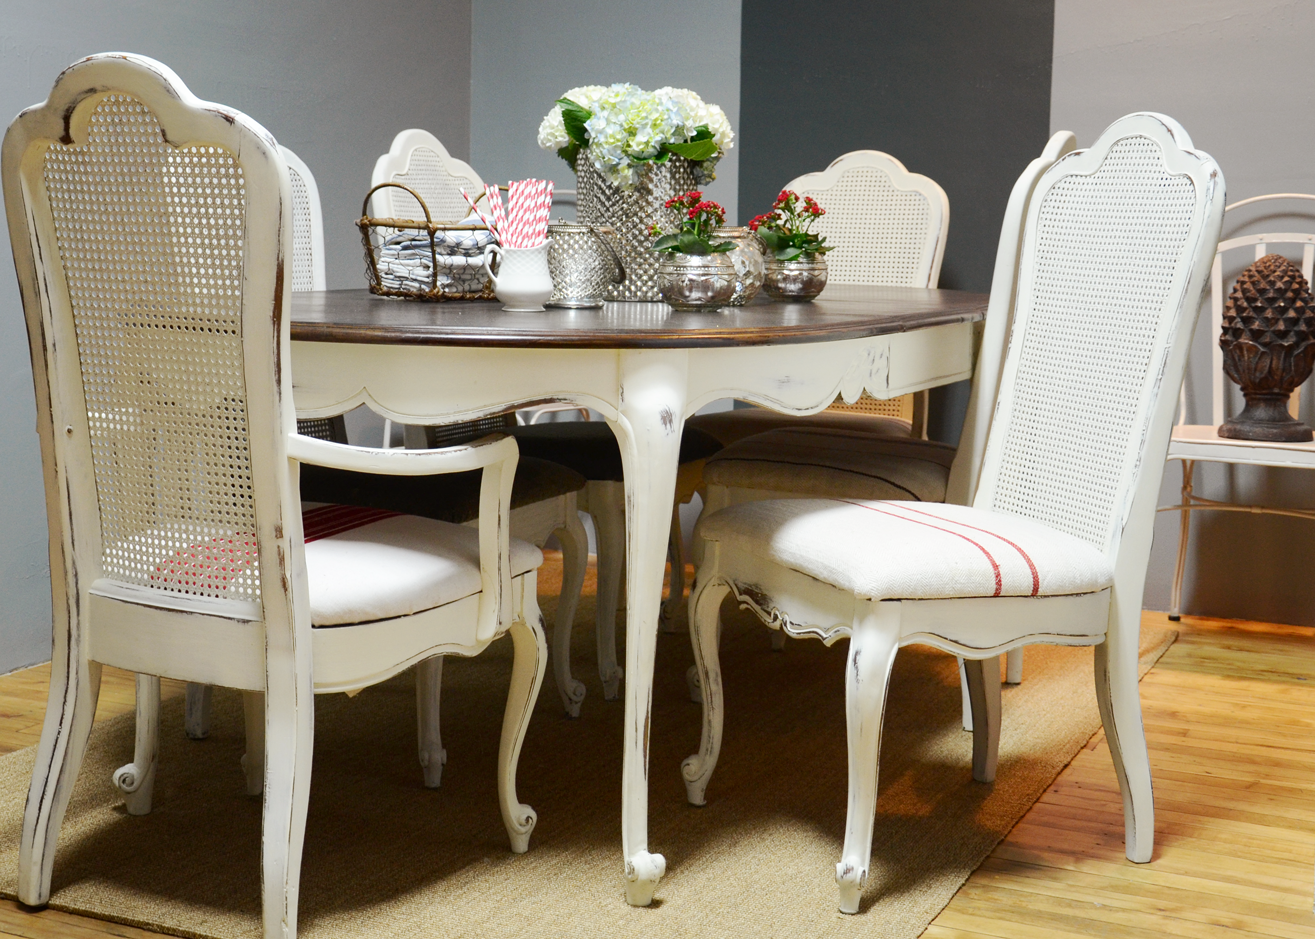 Shabby Chic White Dining Room Tables